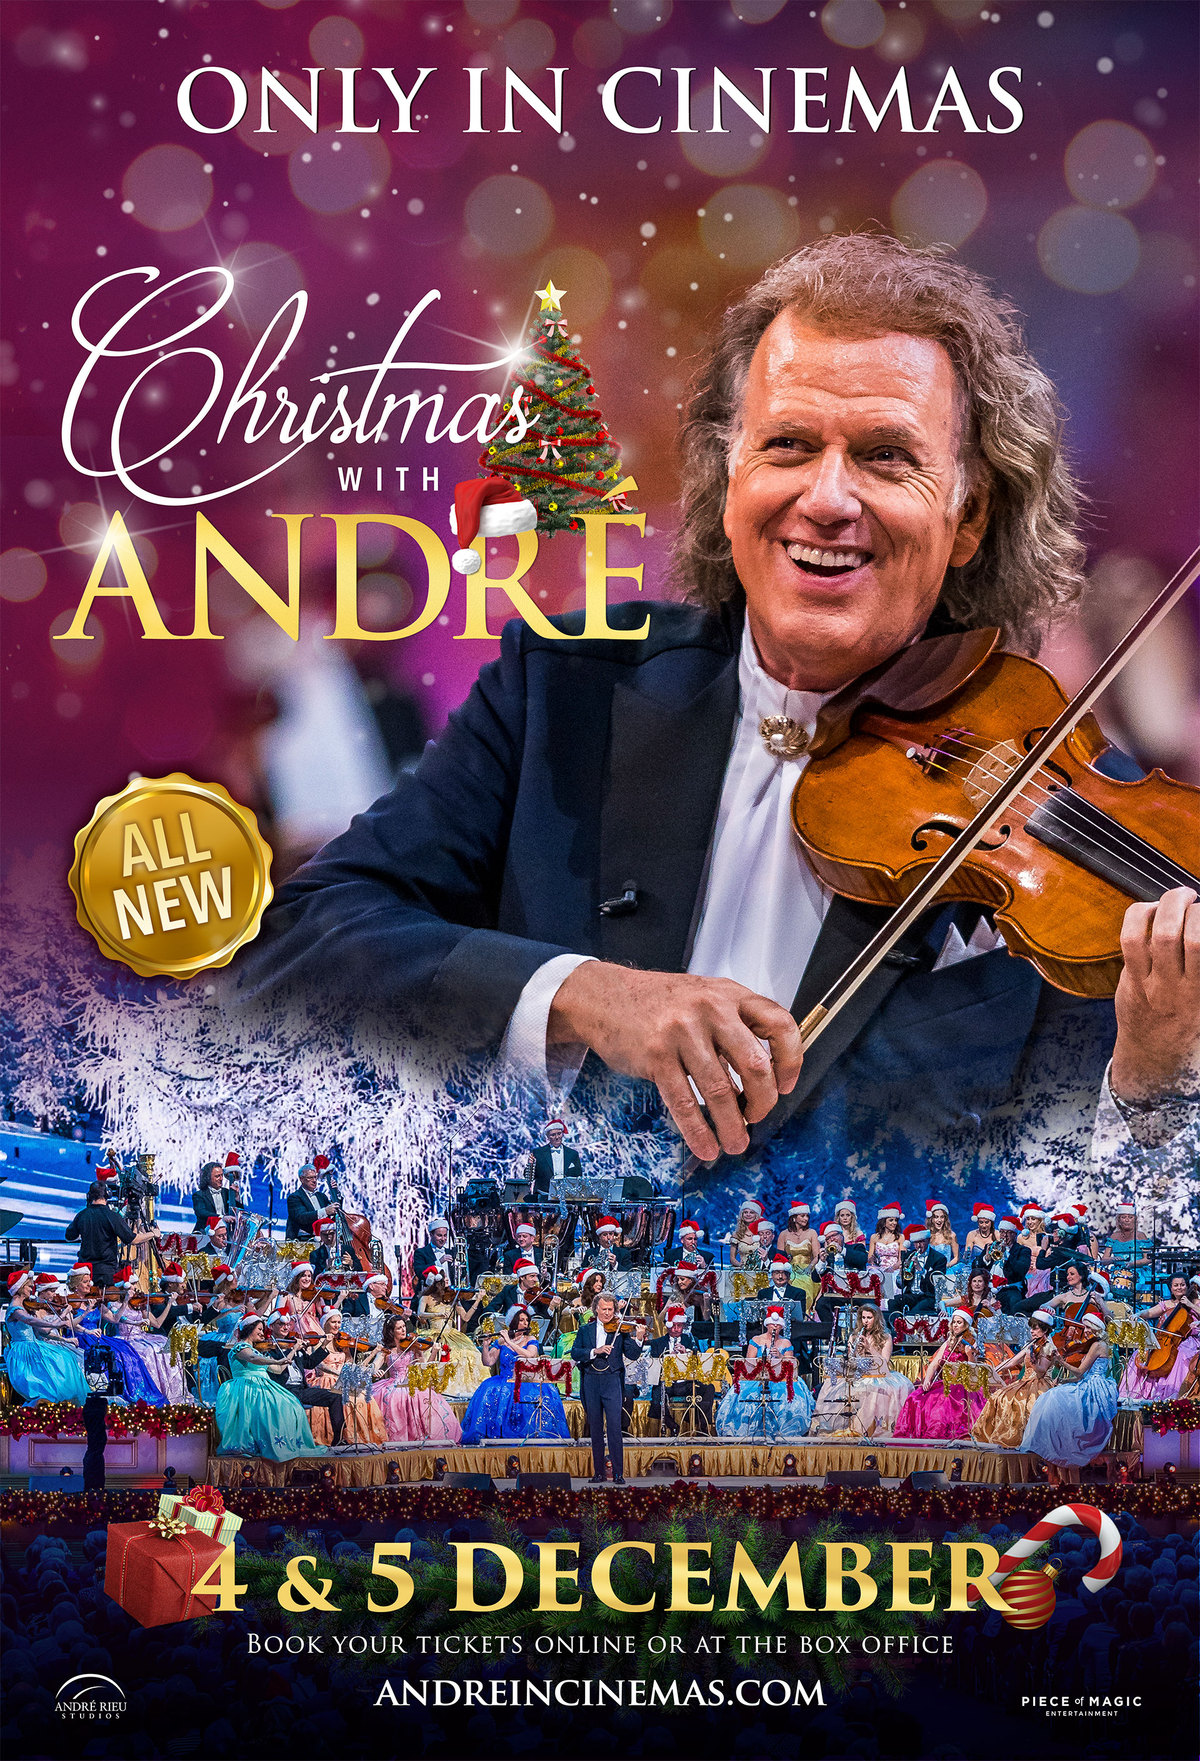 Andre Rieu playing the violin with his orchestra below him.